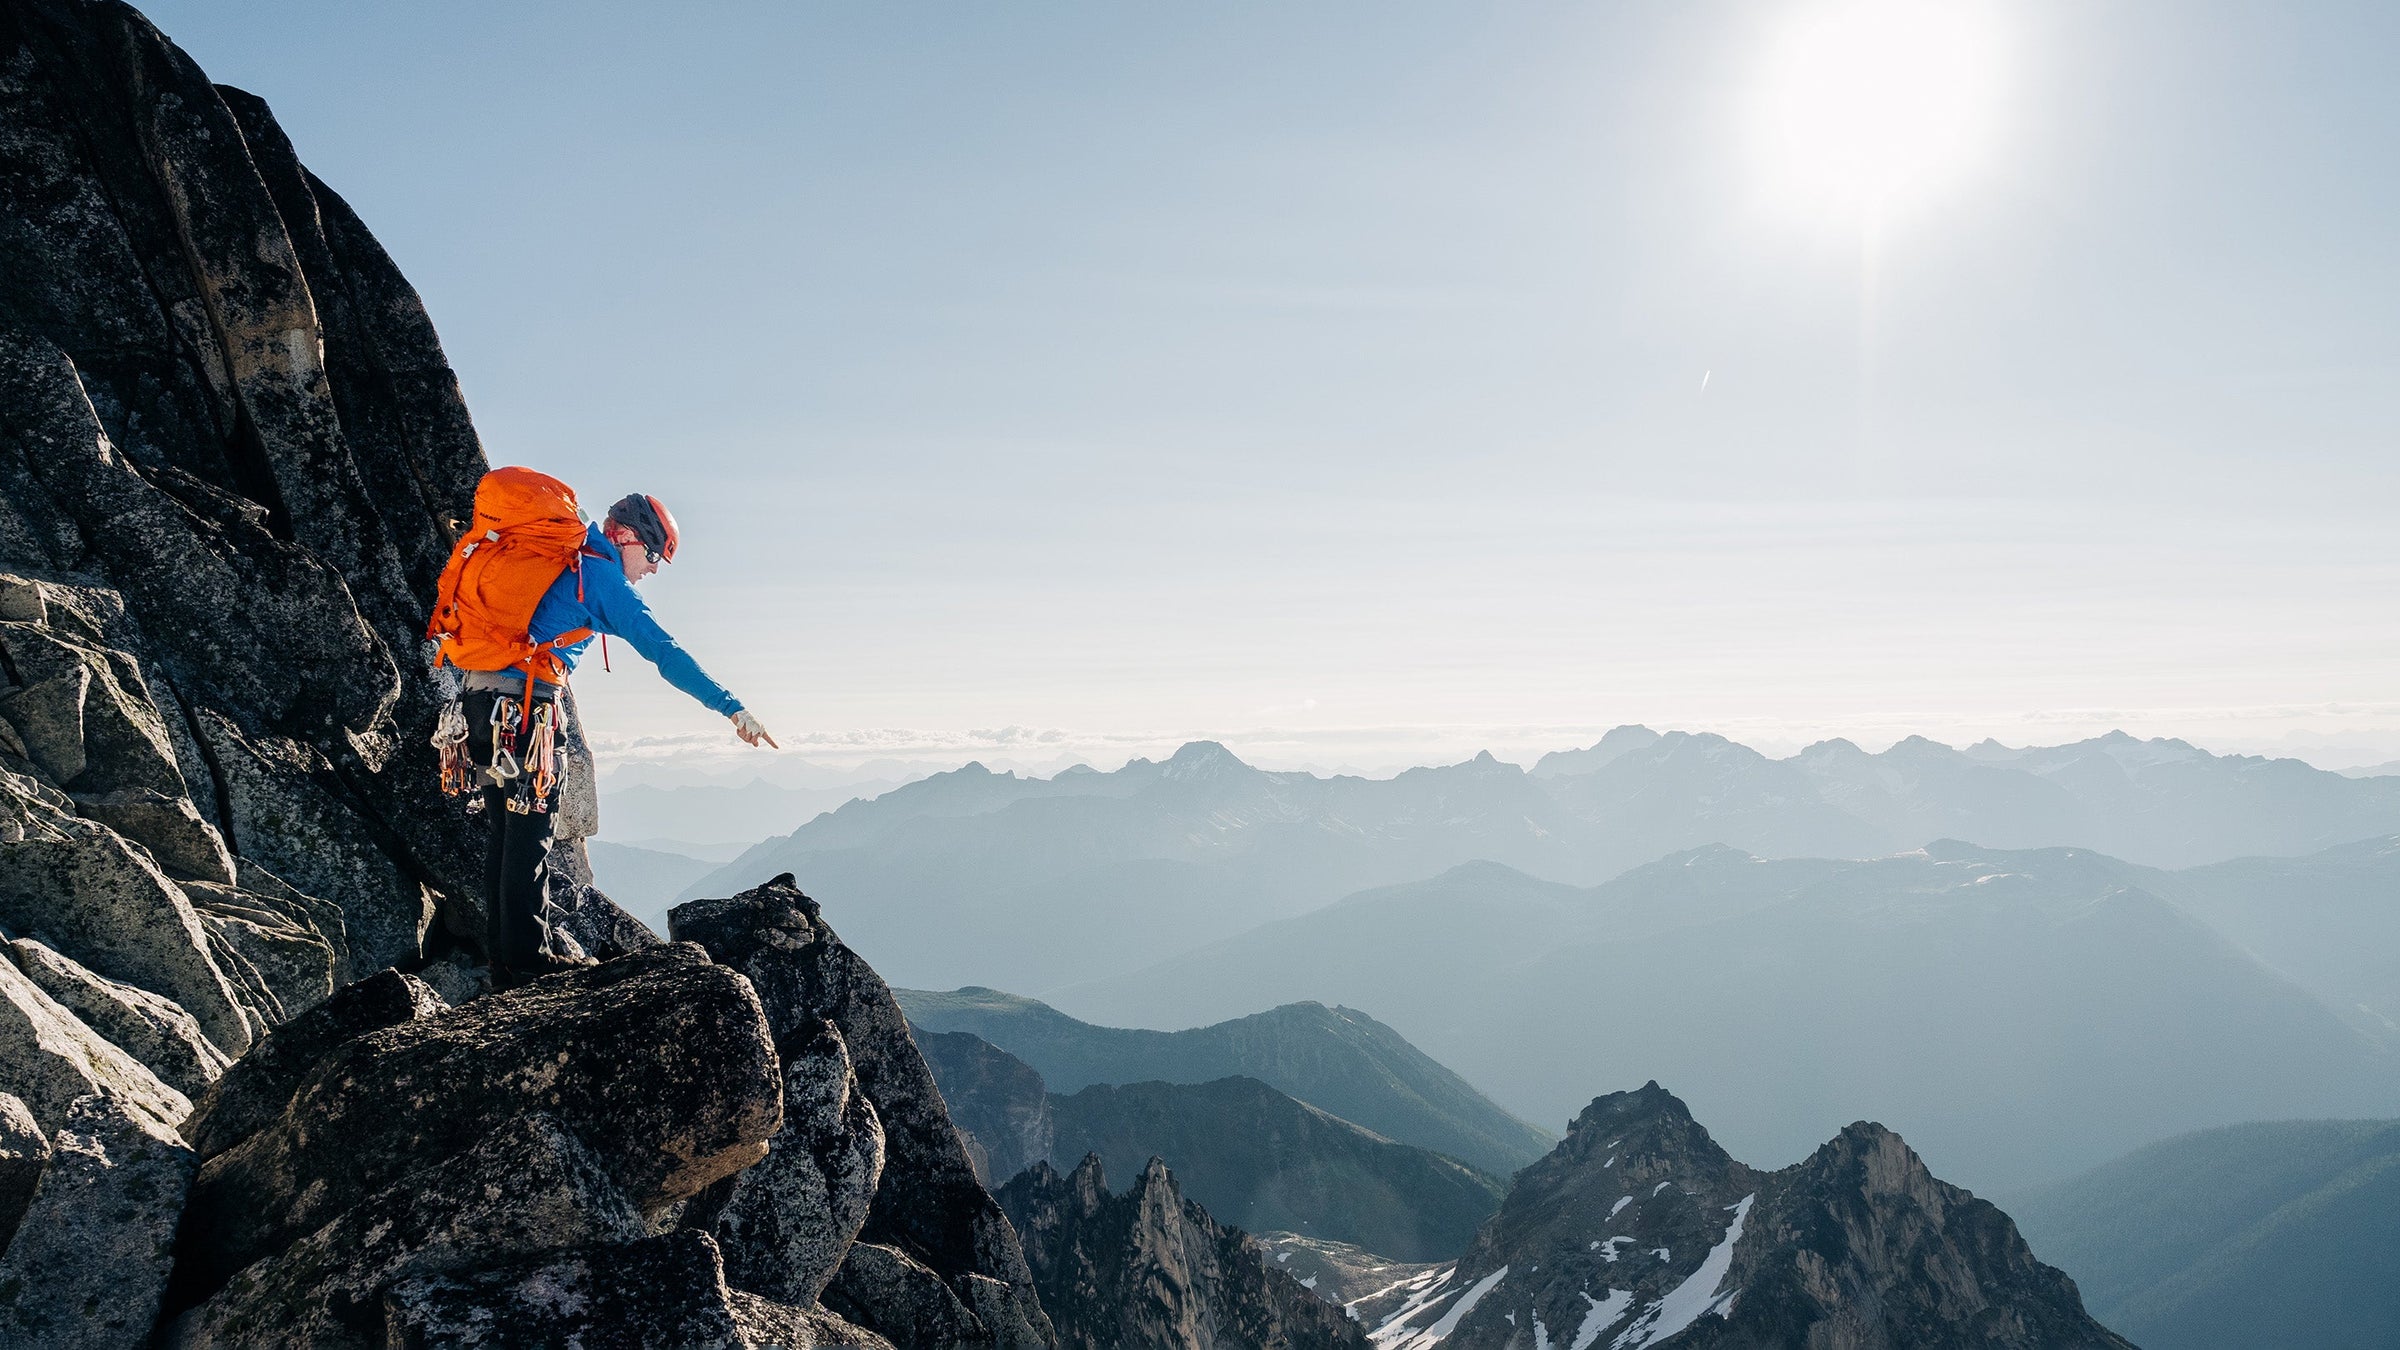 A male alpine climber points out at a view from a high mountain ridge on Bugaboo Spire